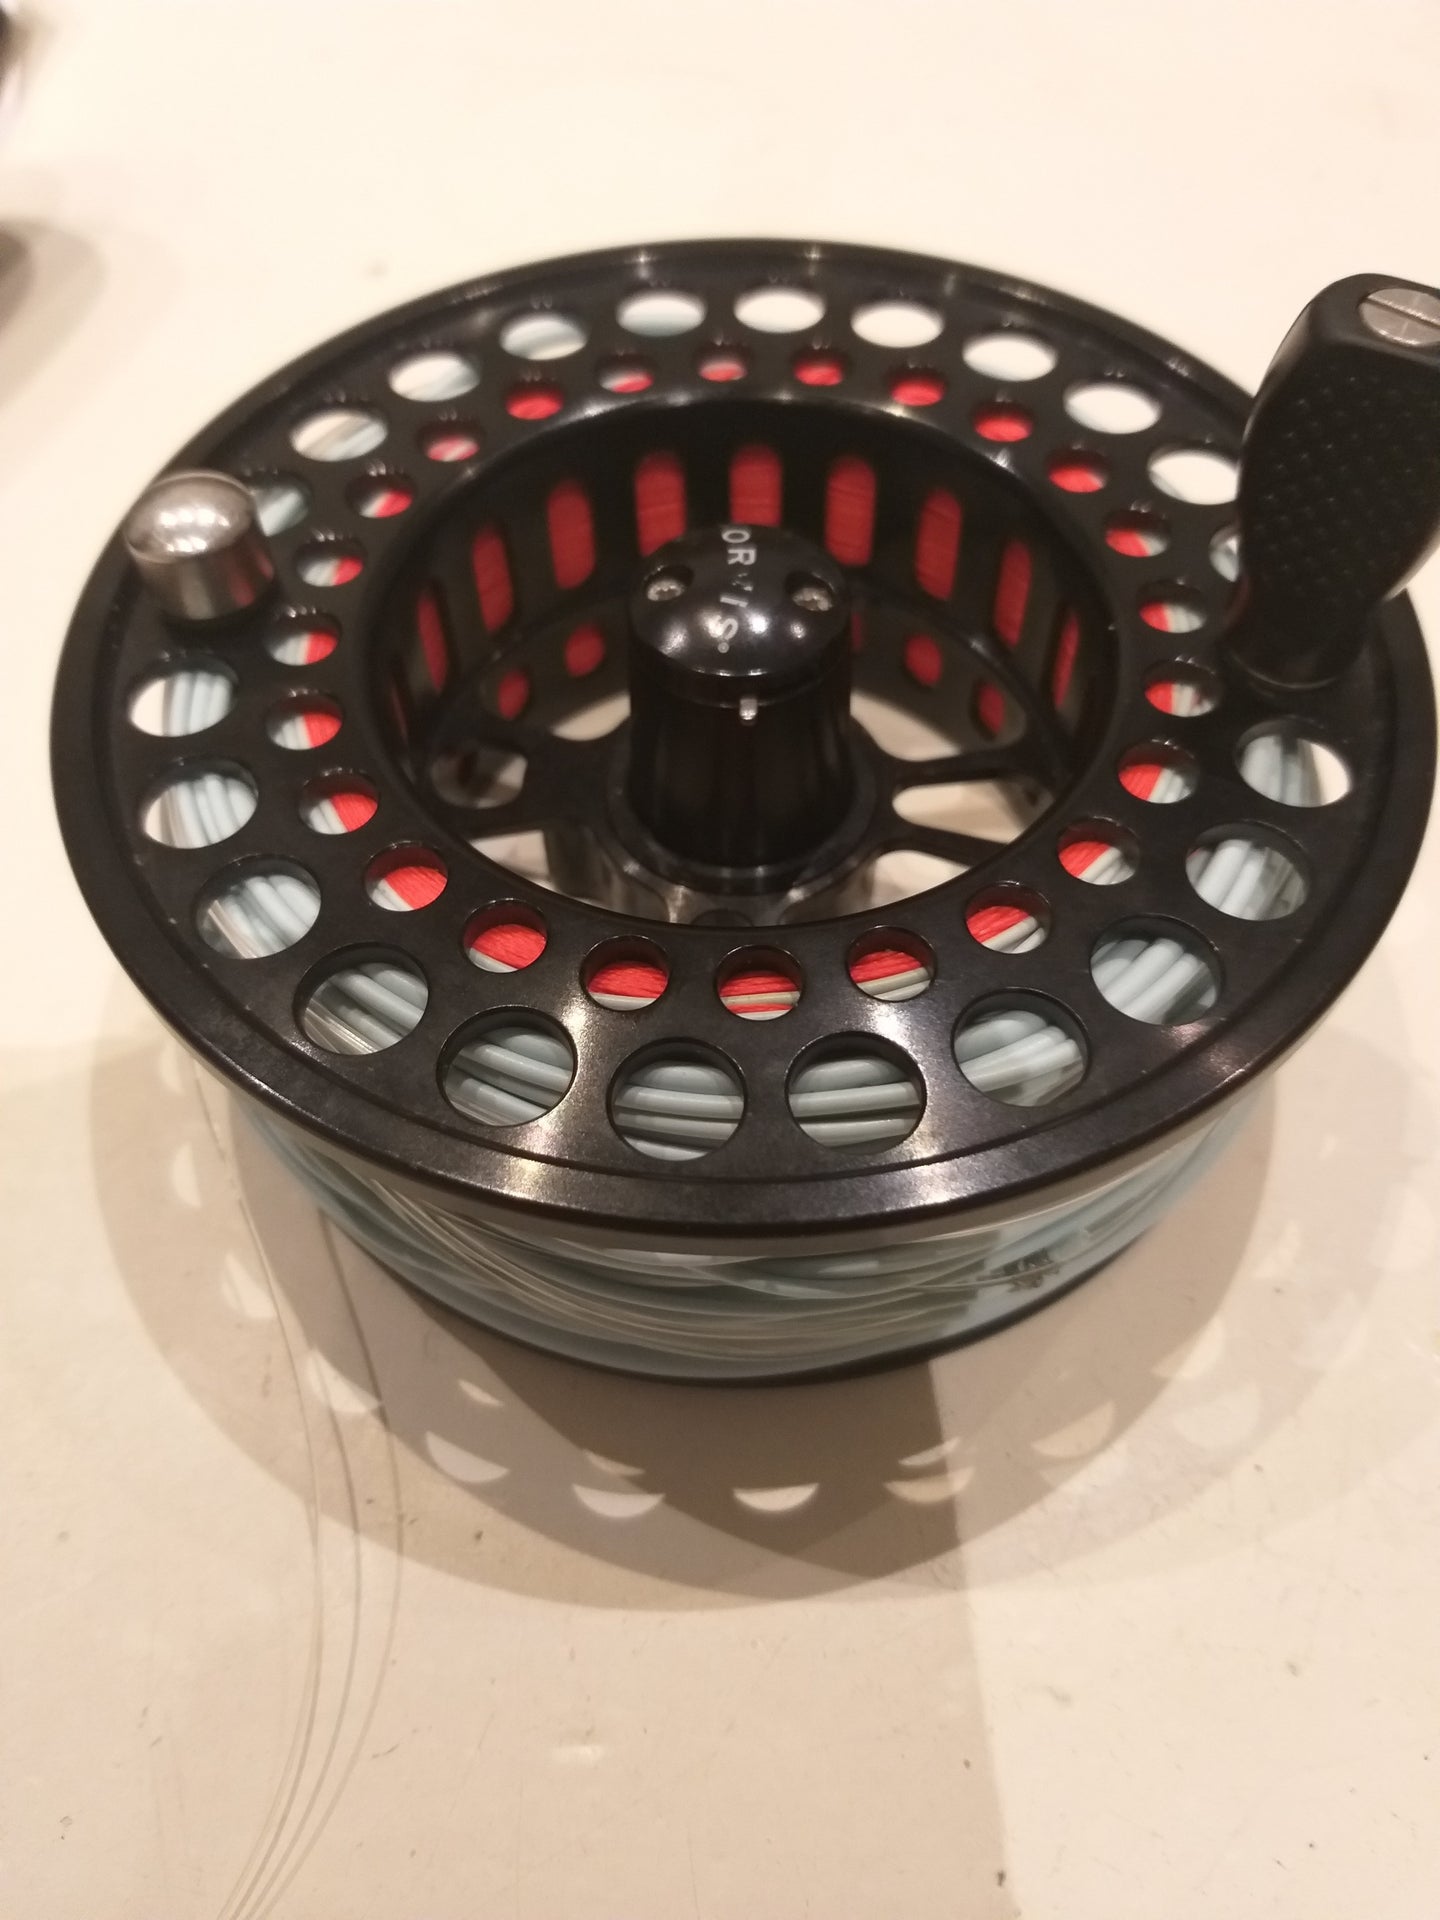 ORVIS BATTENKILL LARGE ARBOR VI Salmon Fly Reel with spare spool